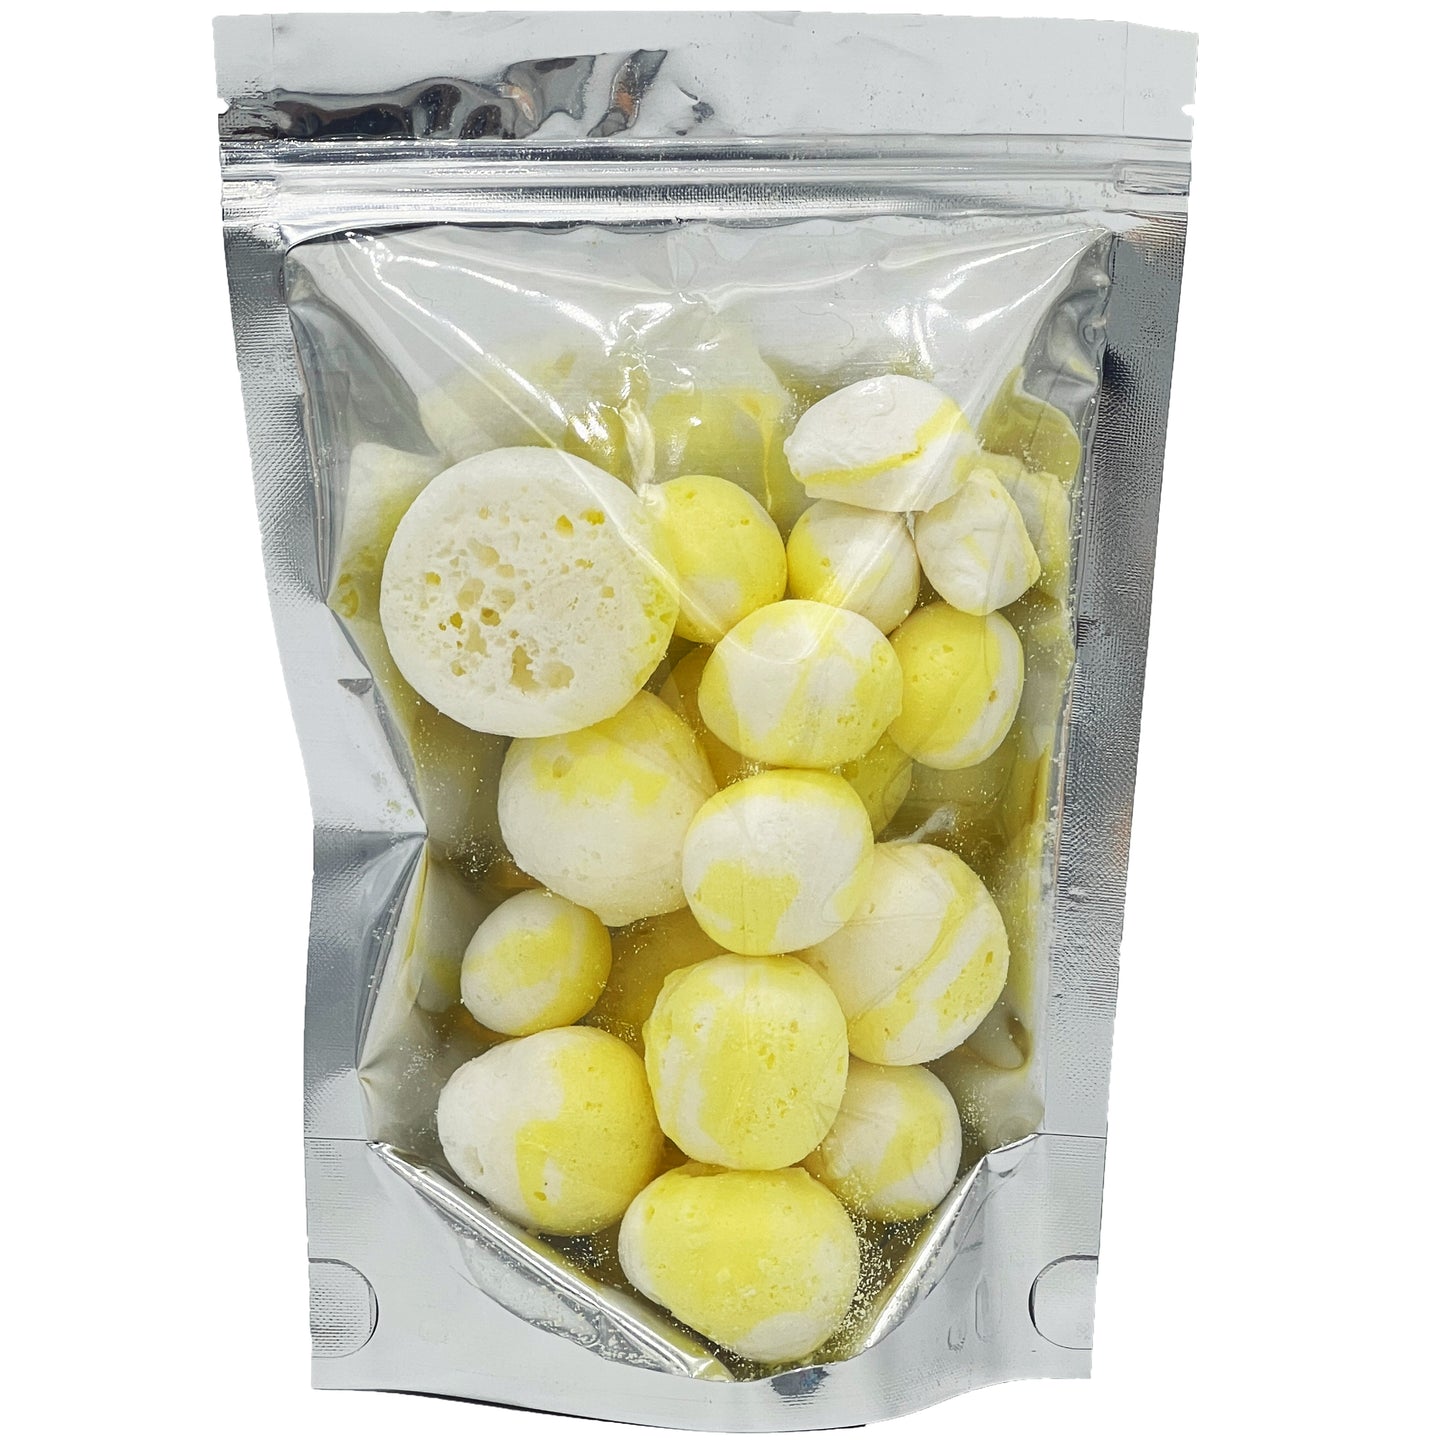 Freeze Dried Candy Buttered Popcorn Taffy Variety Pack Crunch Treats 1.7 oz